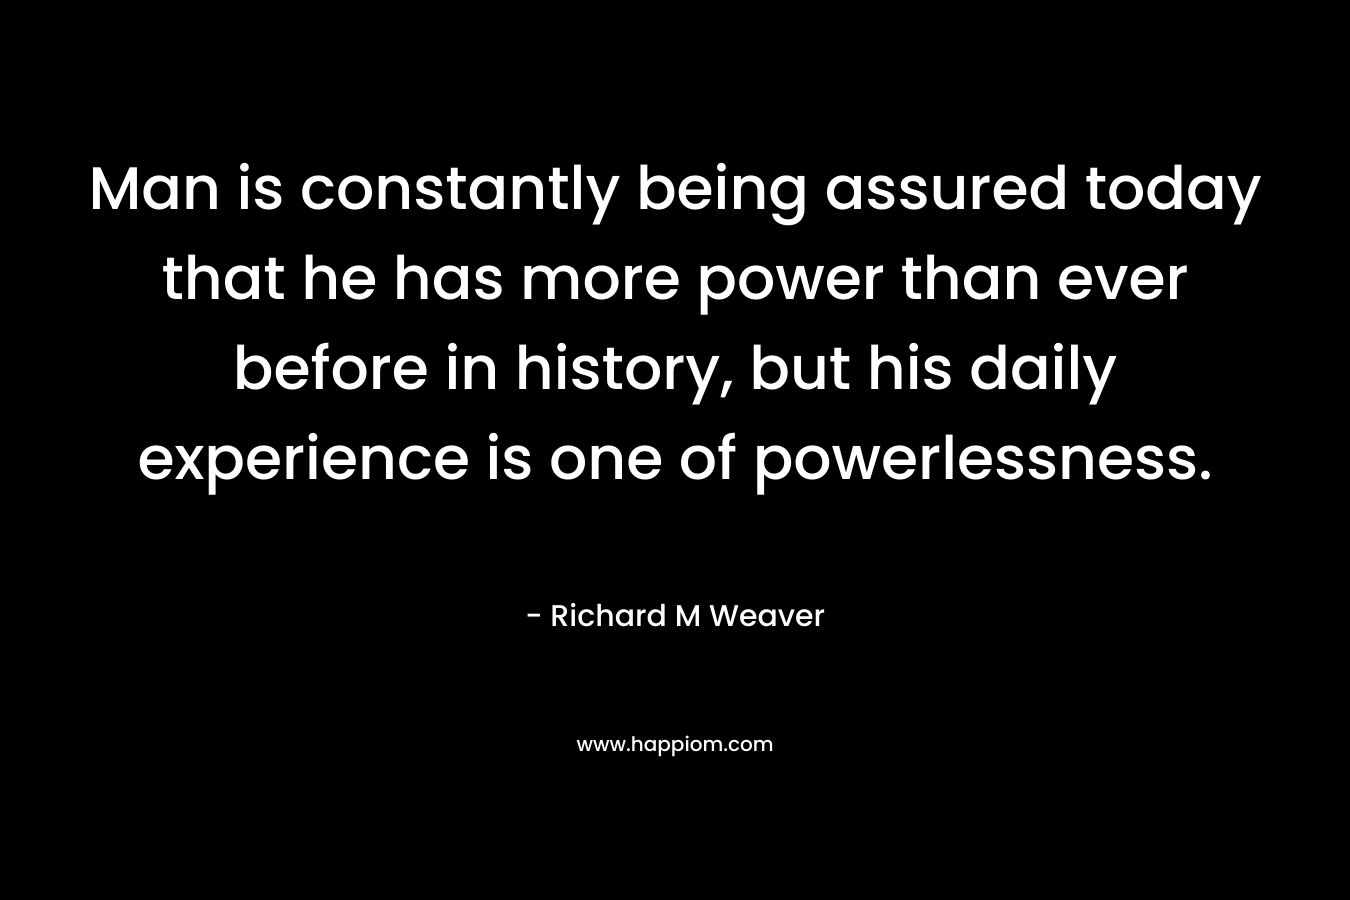 Man is constantly being assured today that he has more power than ever before in history, but his daily experience is one of powerlessness.